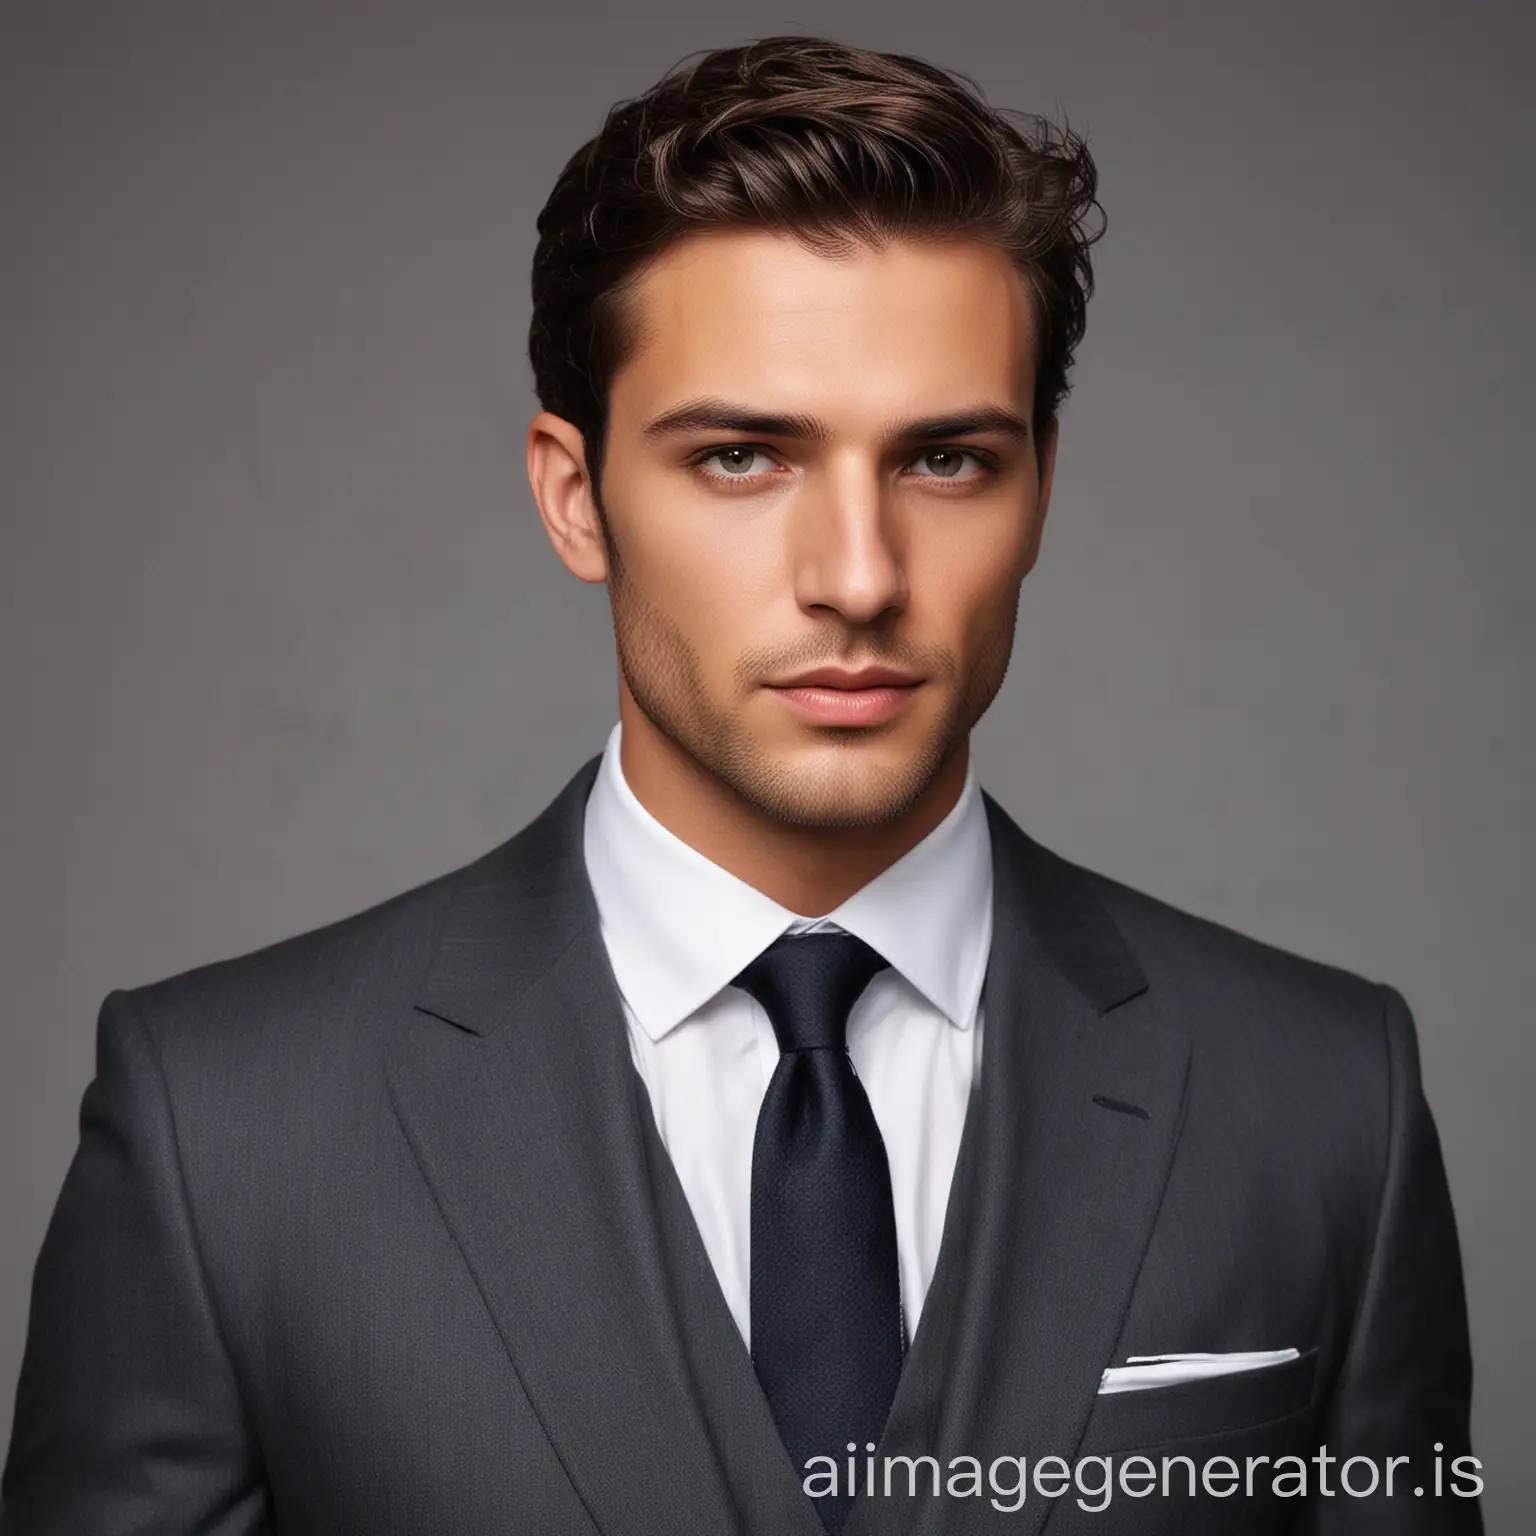 Generate a realistic picture of a men looking like a model dressed in a professional suit